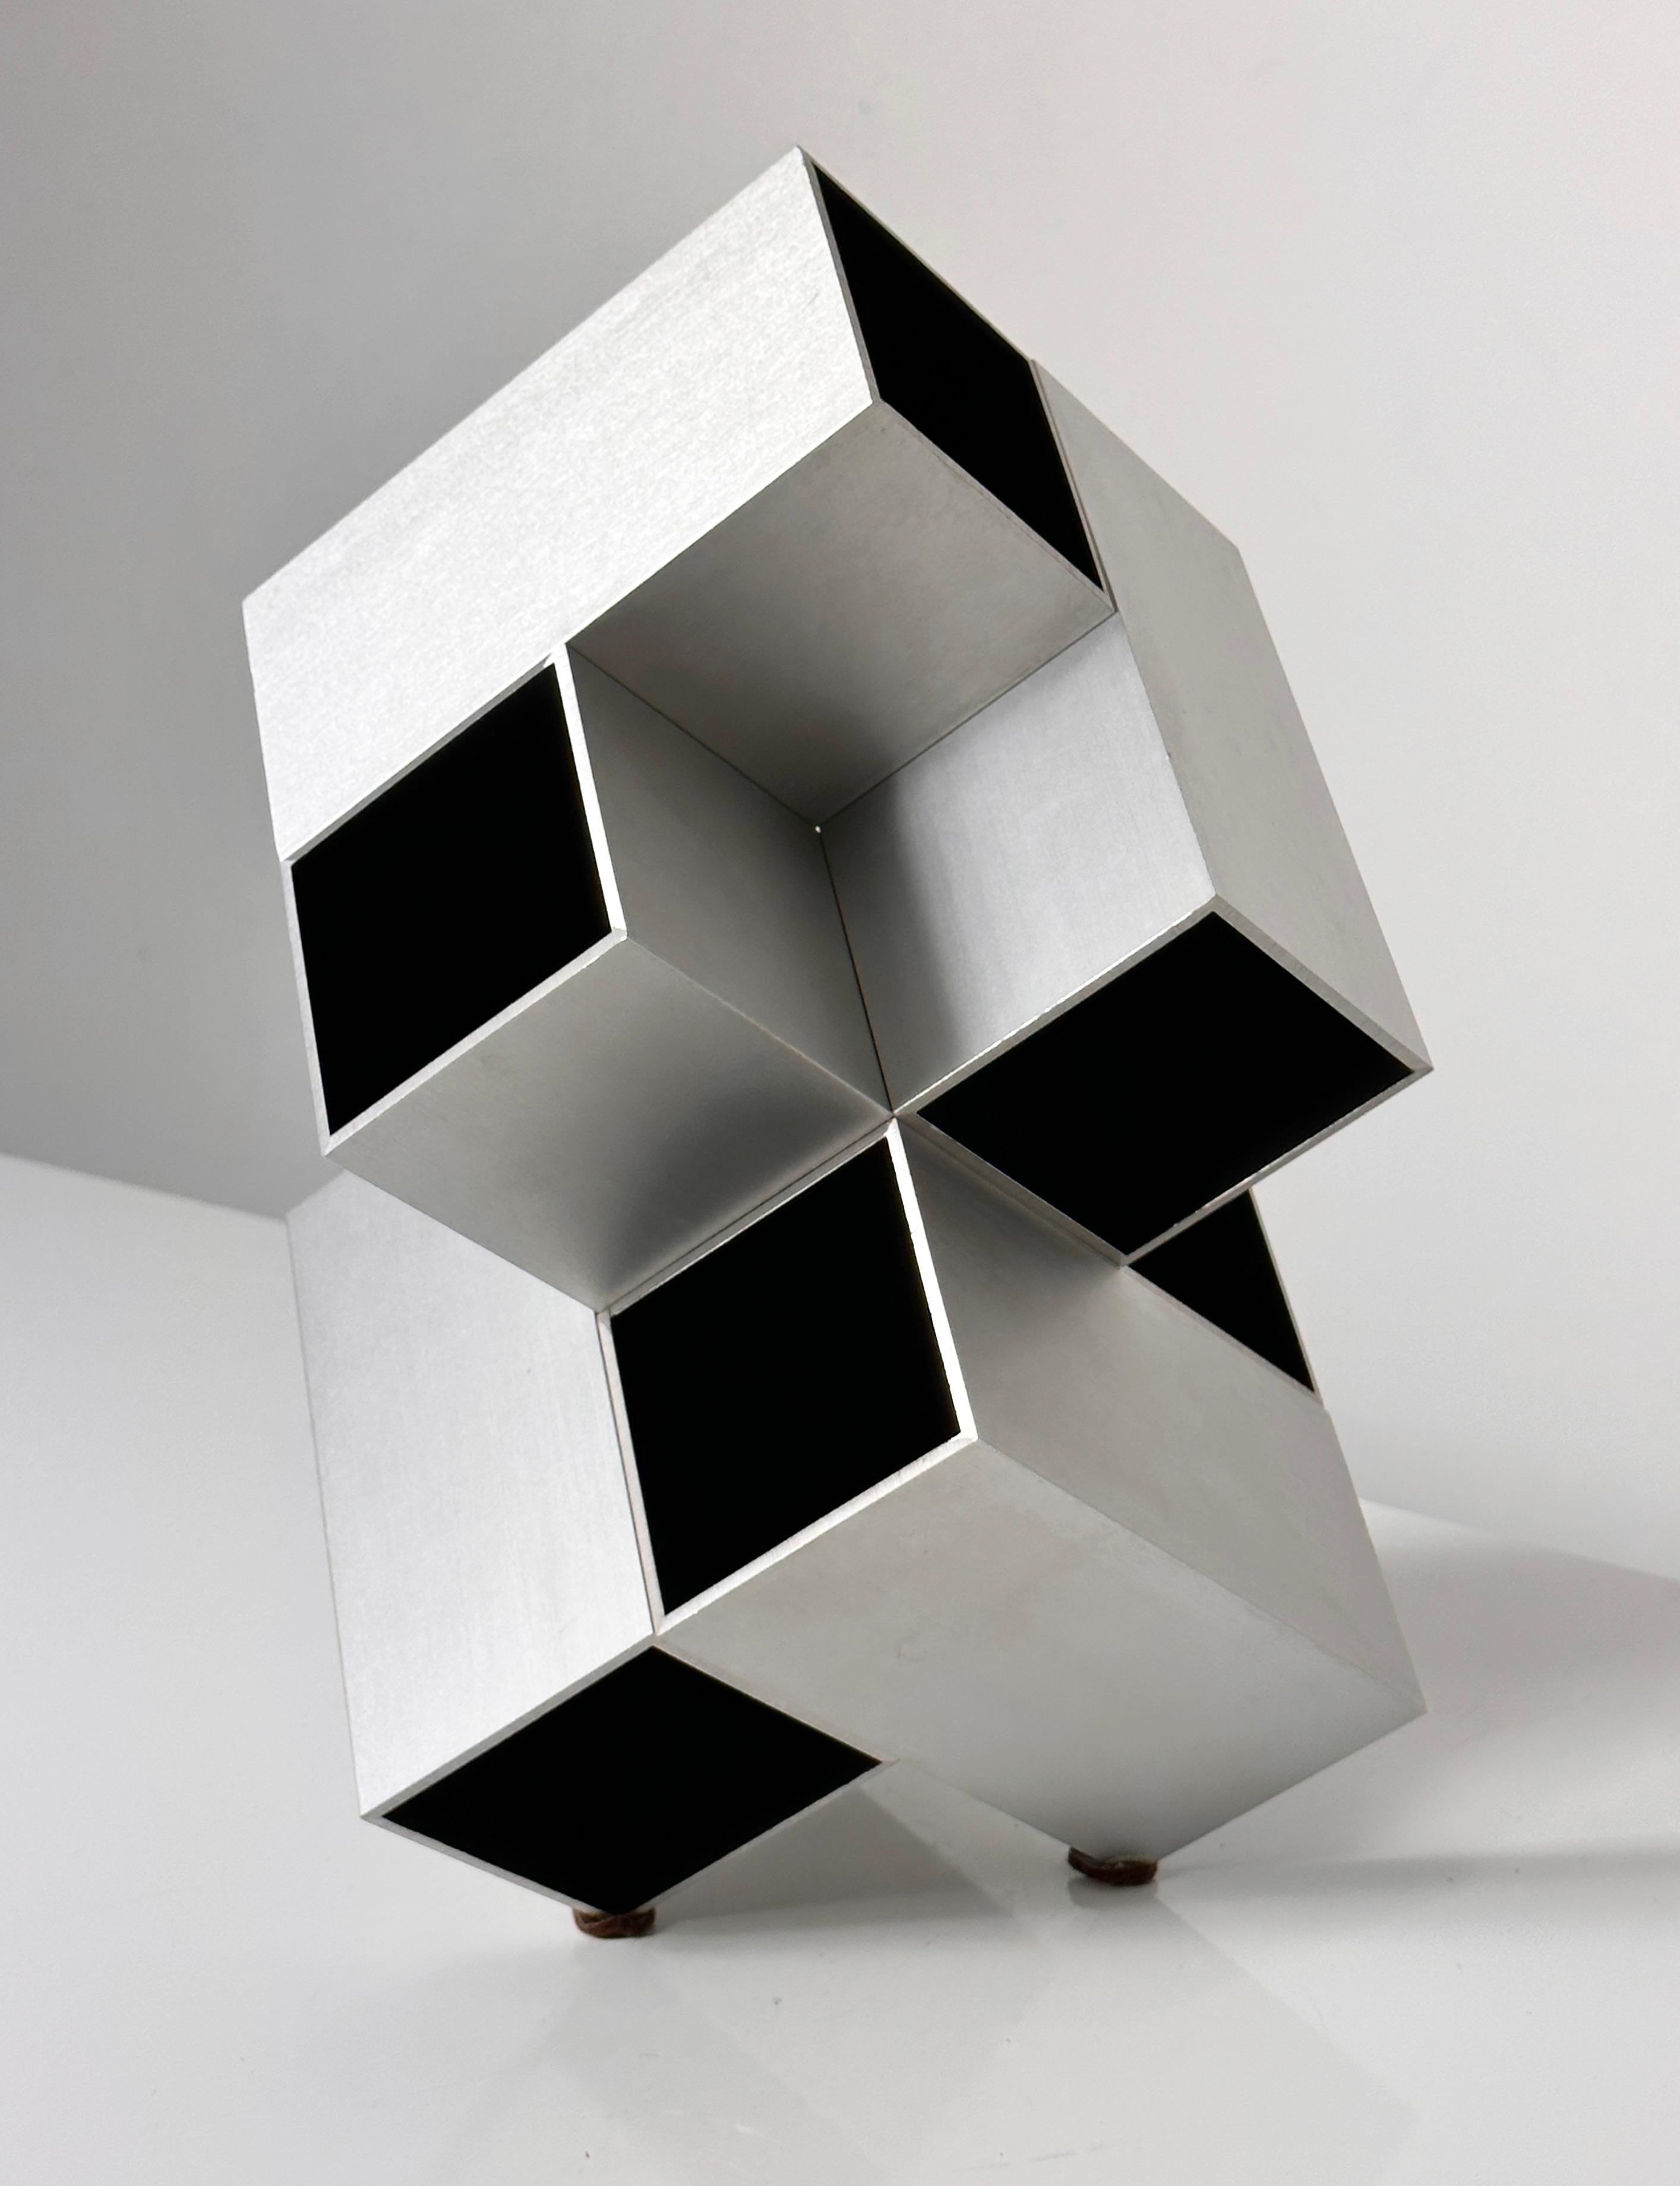 Abstract Modern Modular Aluminum Op Art Cube Sculpture by Kosso Eloul 1970s In Good Condition For Sale In Troy, MI